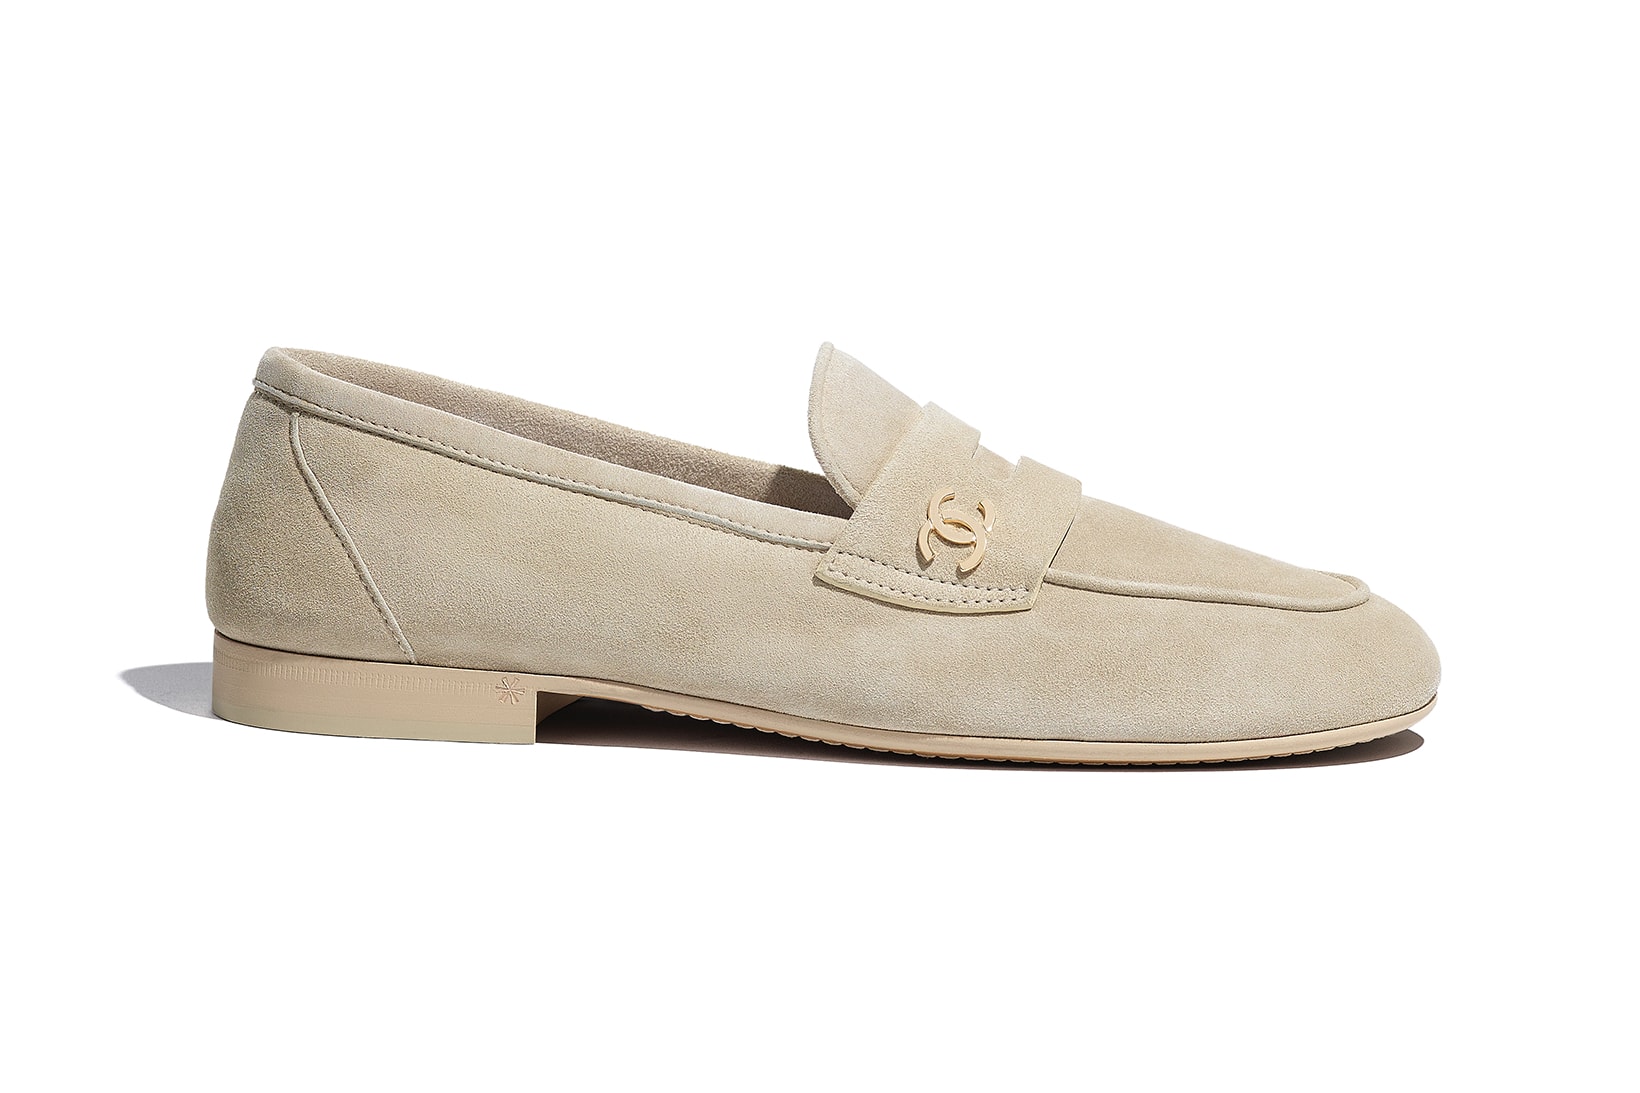 Chanel's SS21 Loafers Feature Gold Logo Detailing